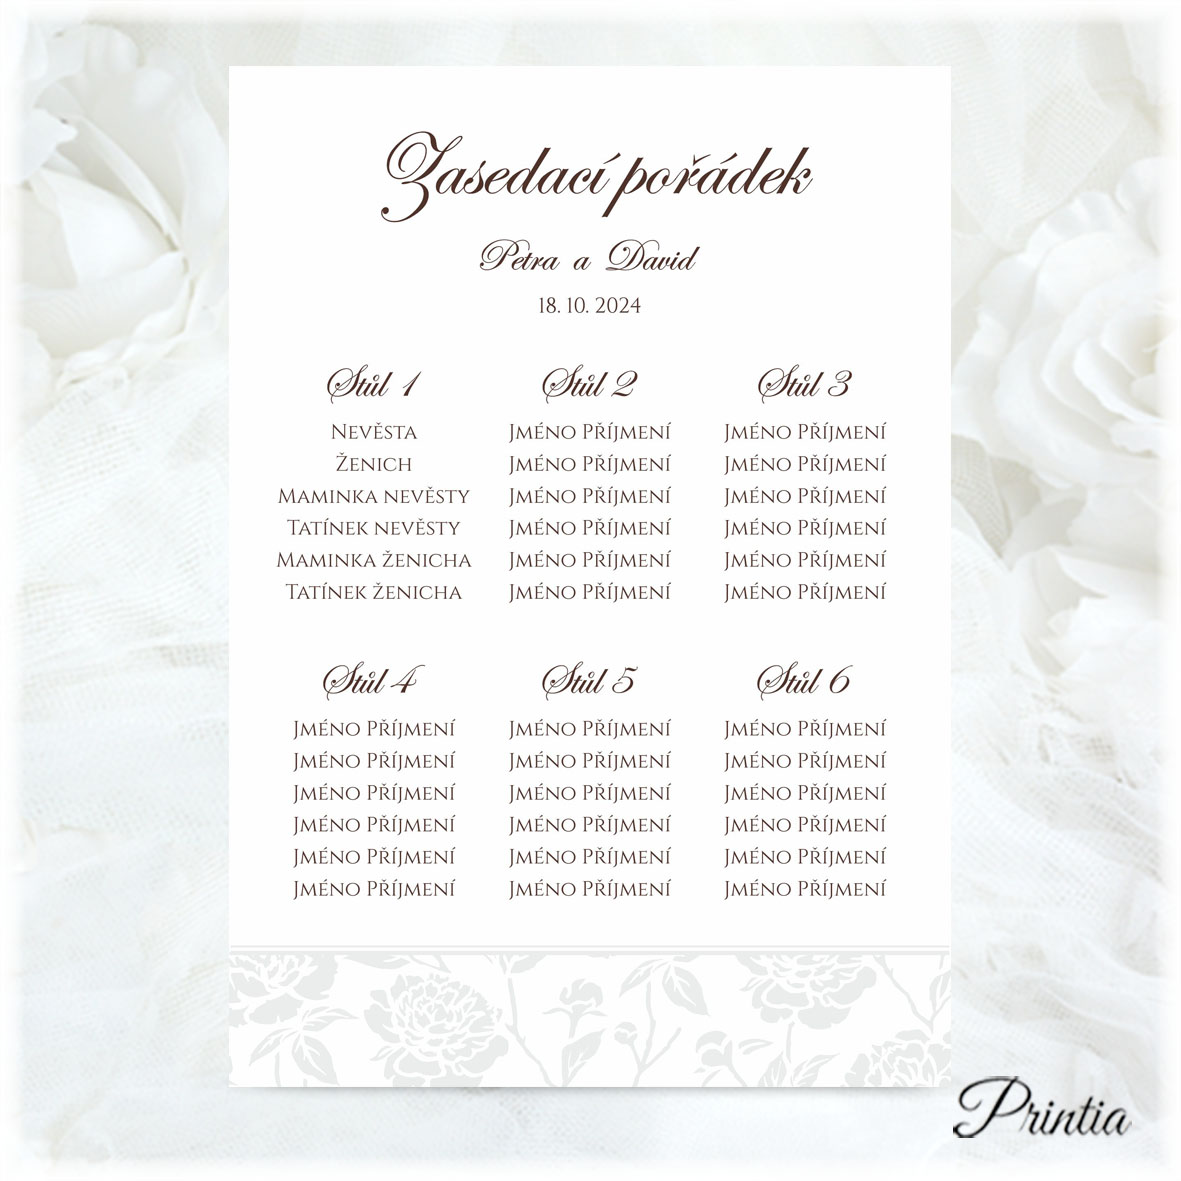 Seating plan with a floral pattern